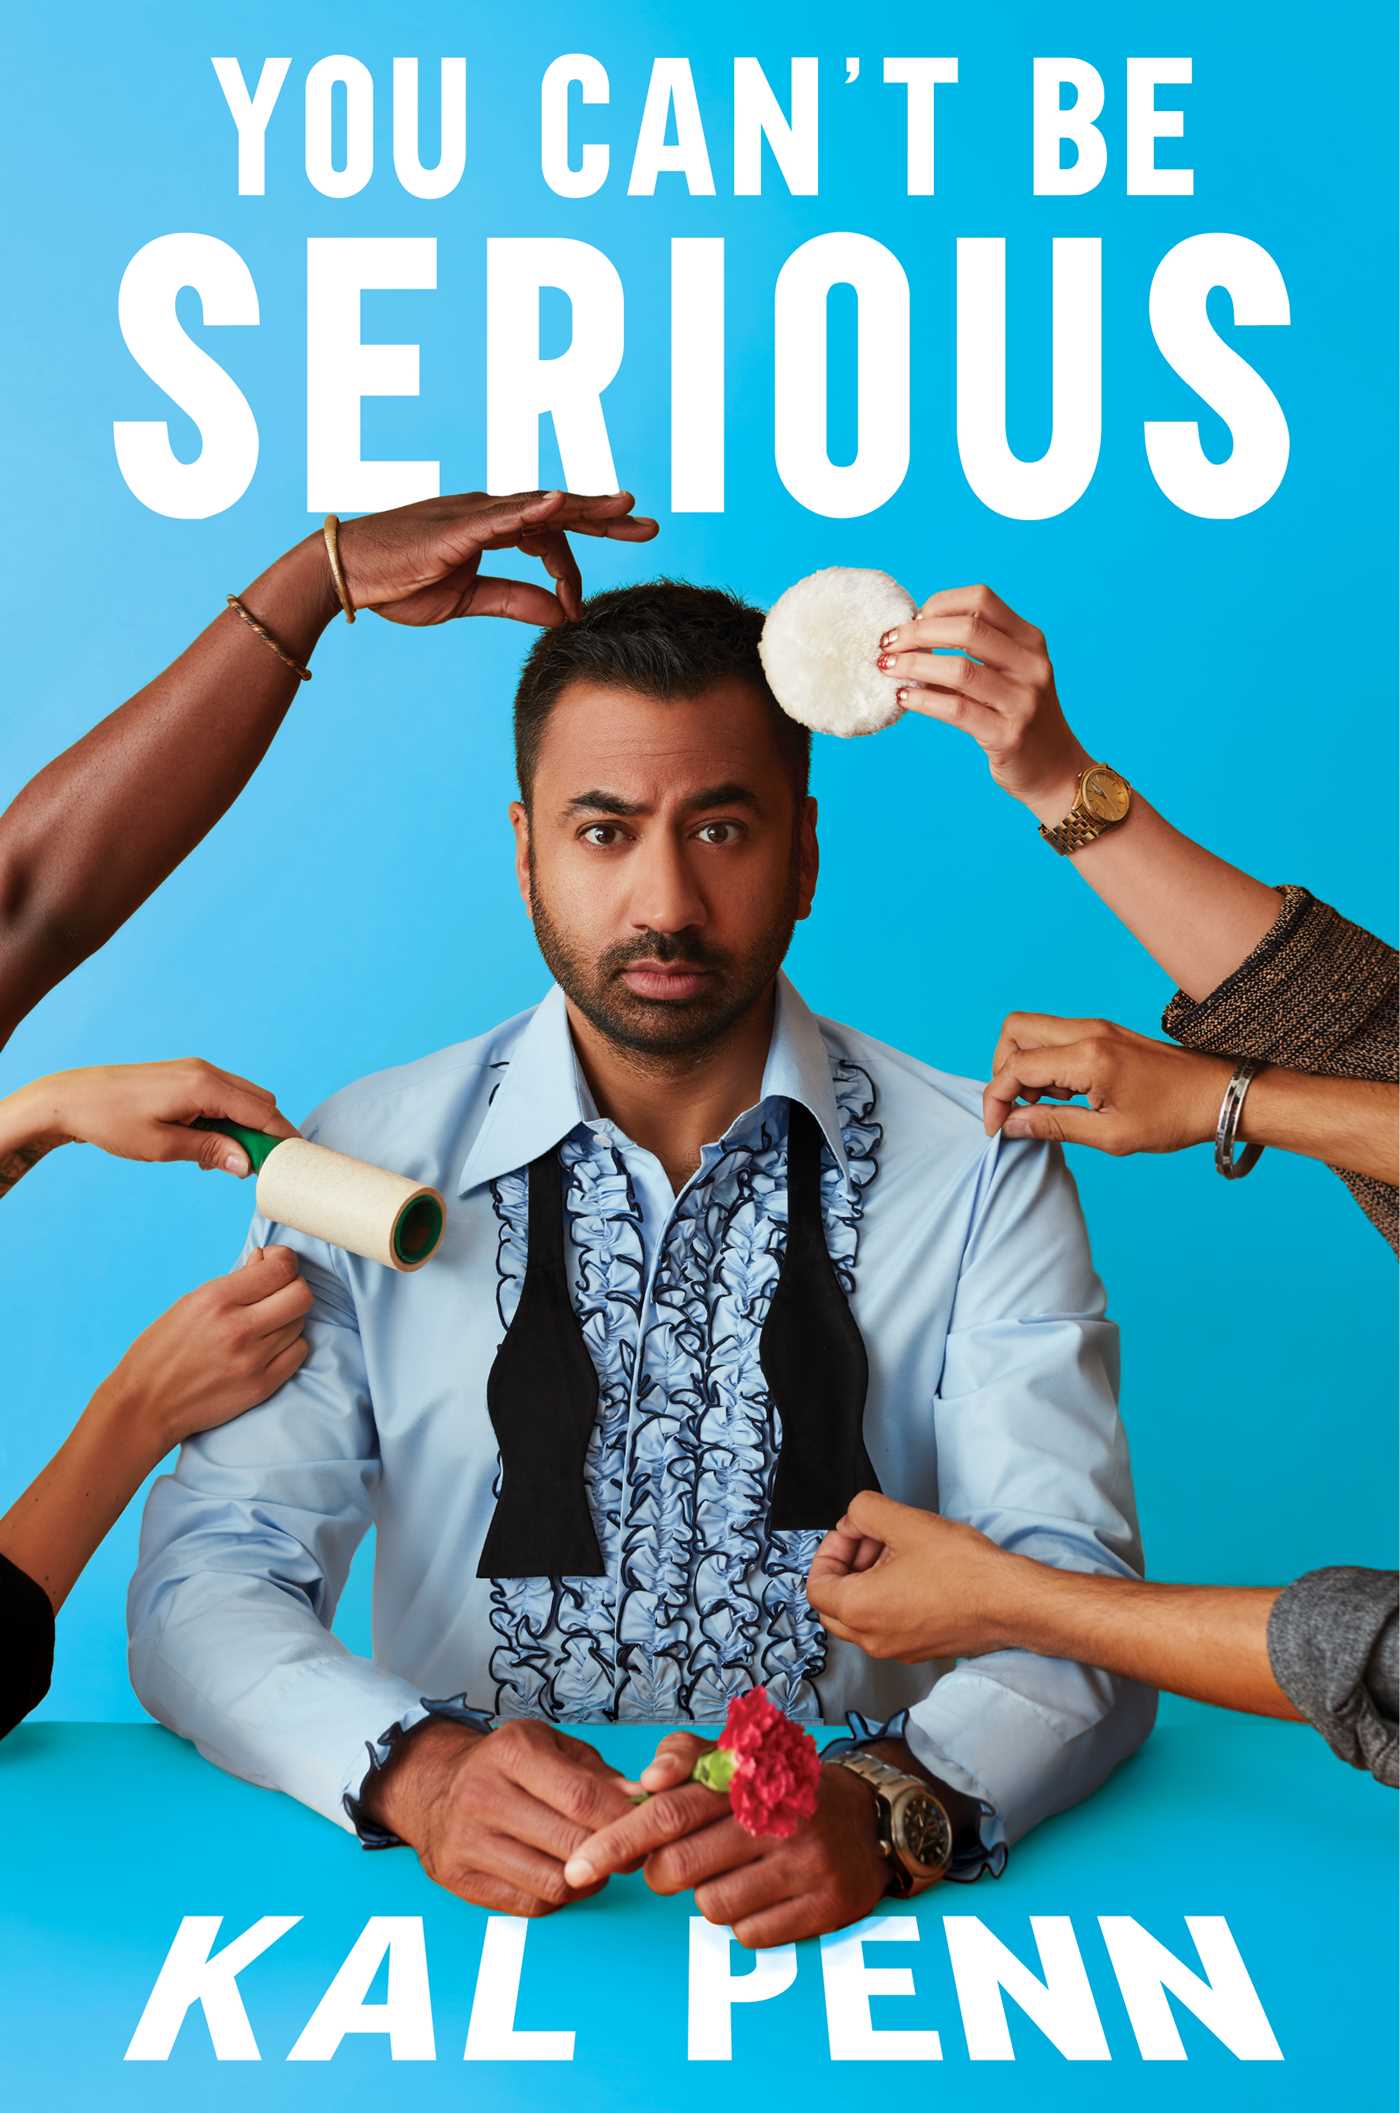 [EPUB] You Can’t Be Serious by Kal Penn